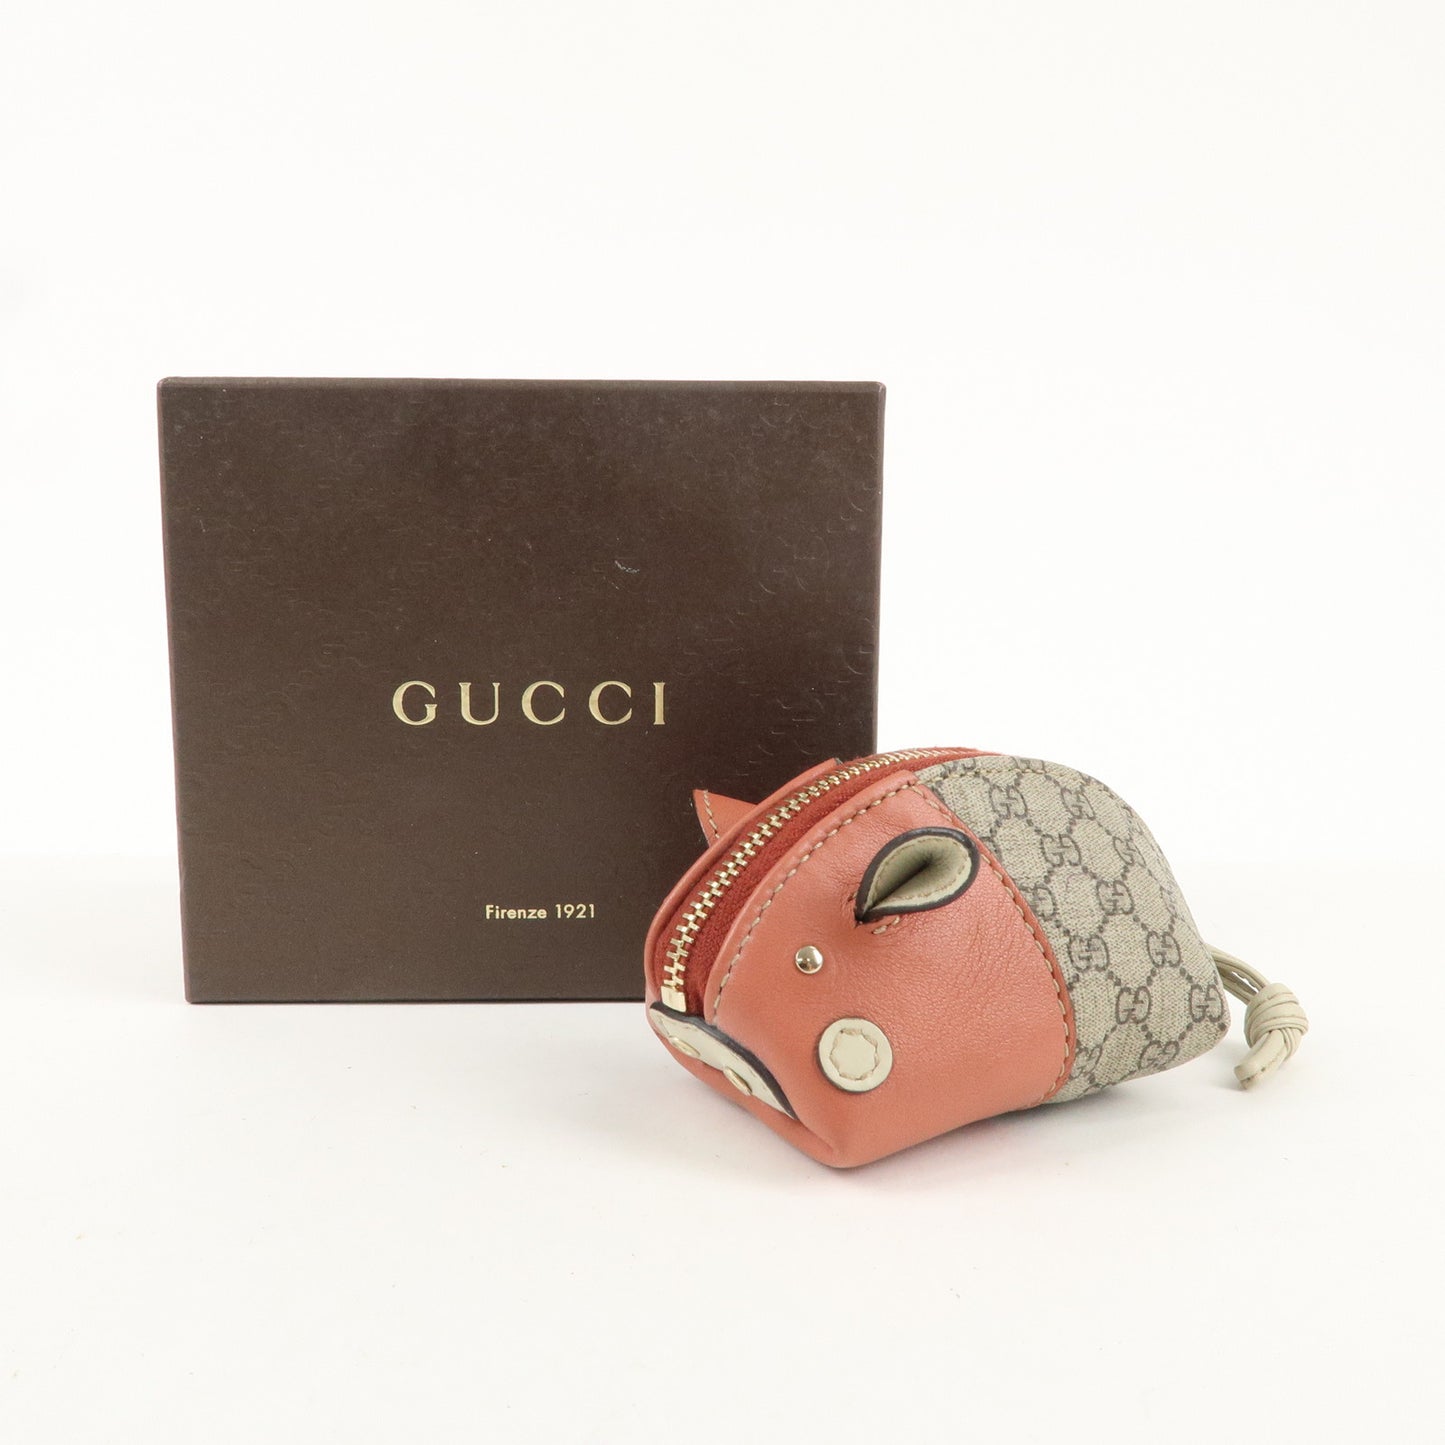 GUCCI Micro GG Supreme Zoo Series Pig Coin Case Beige Pink 256864